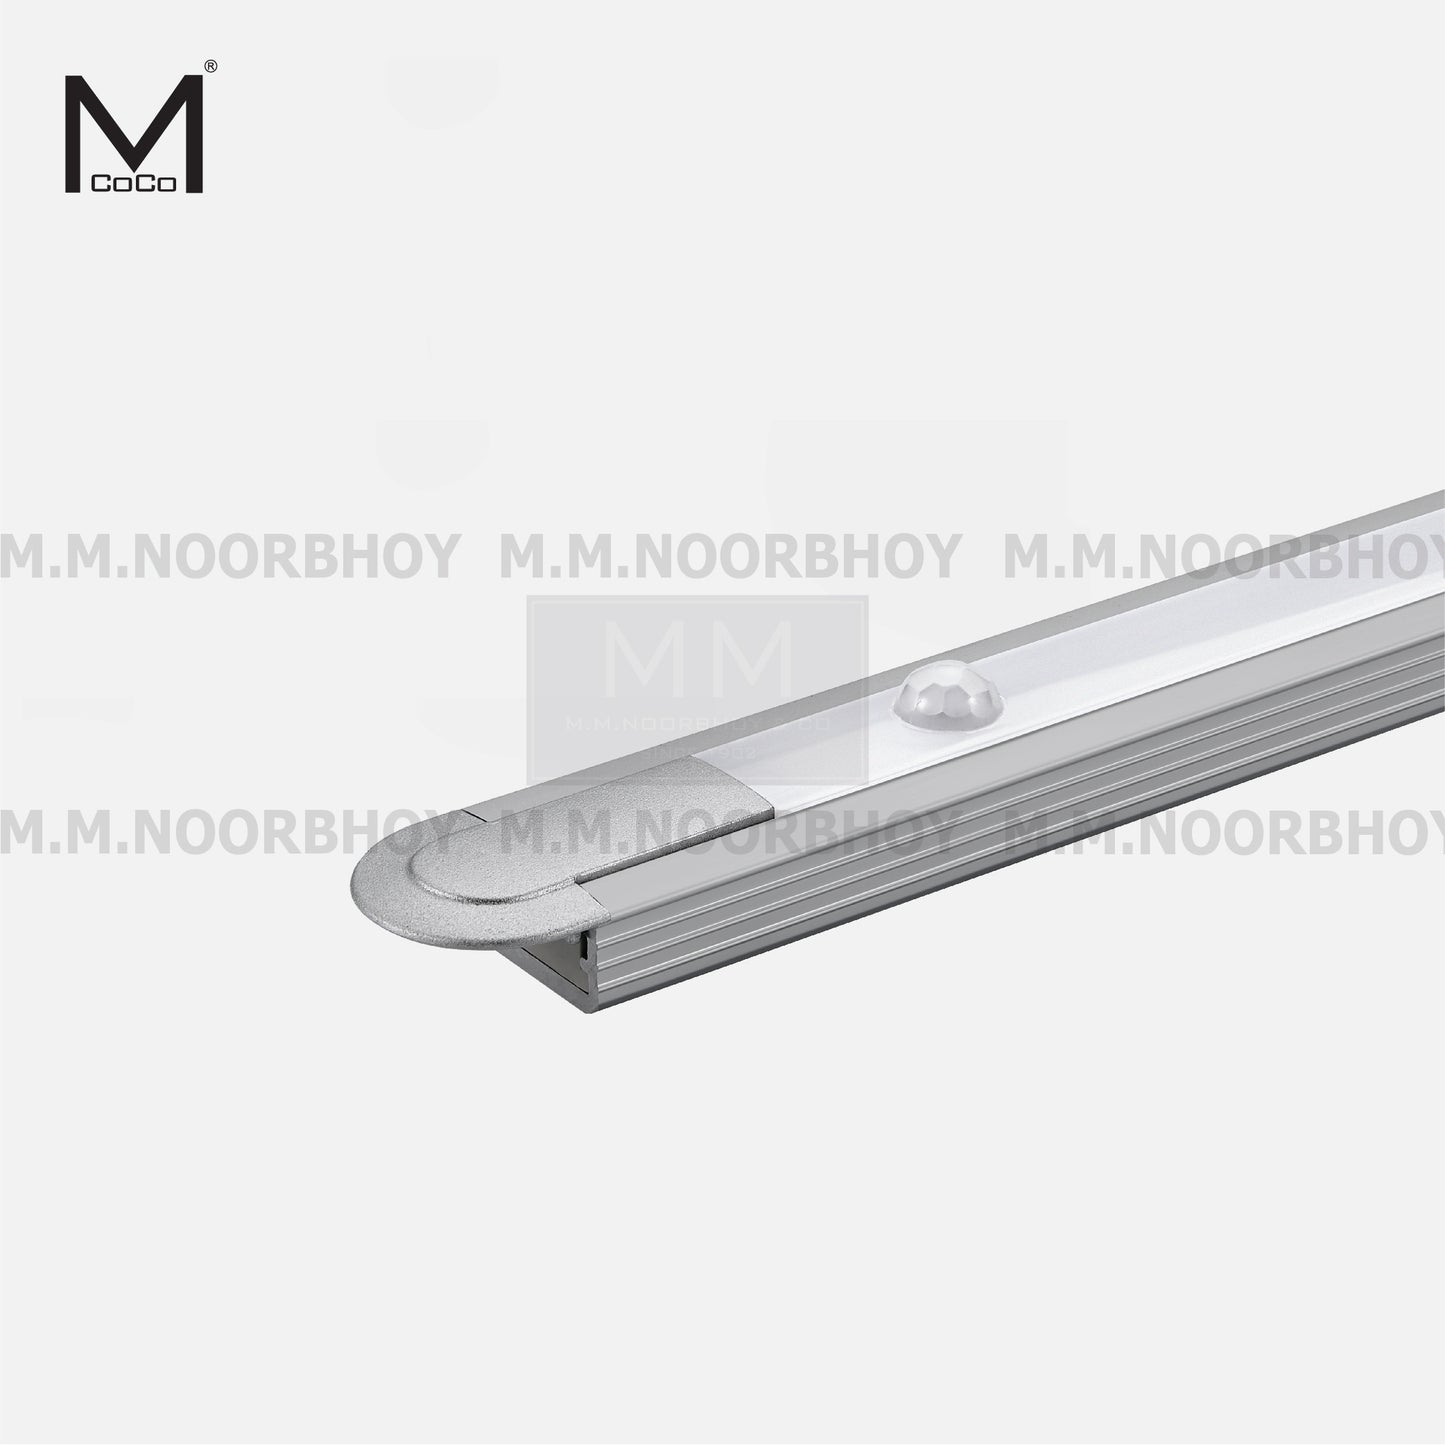 Mcoco Led Light with Hand Sweep Sensor Switch – 4000K - L051